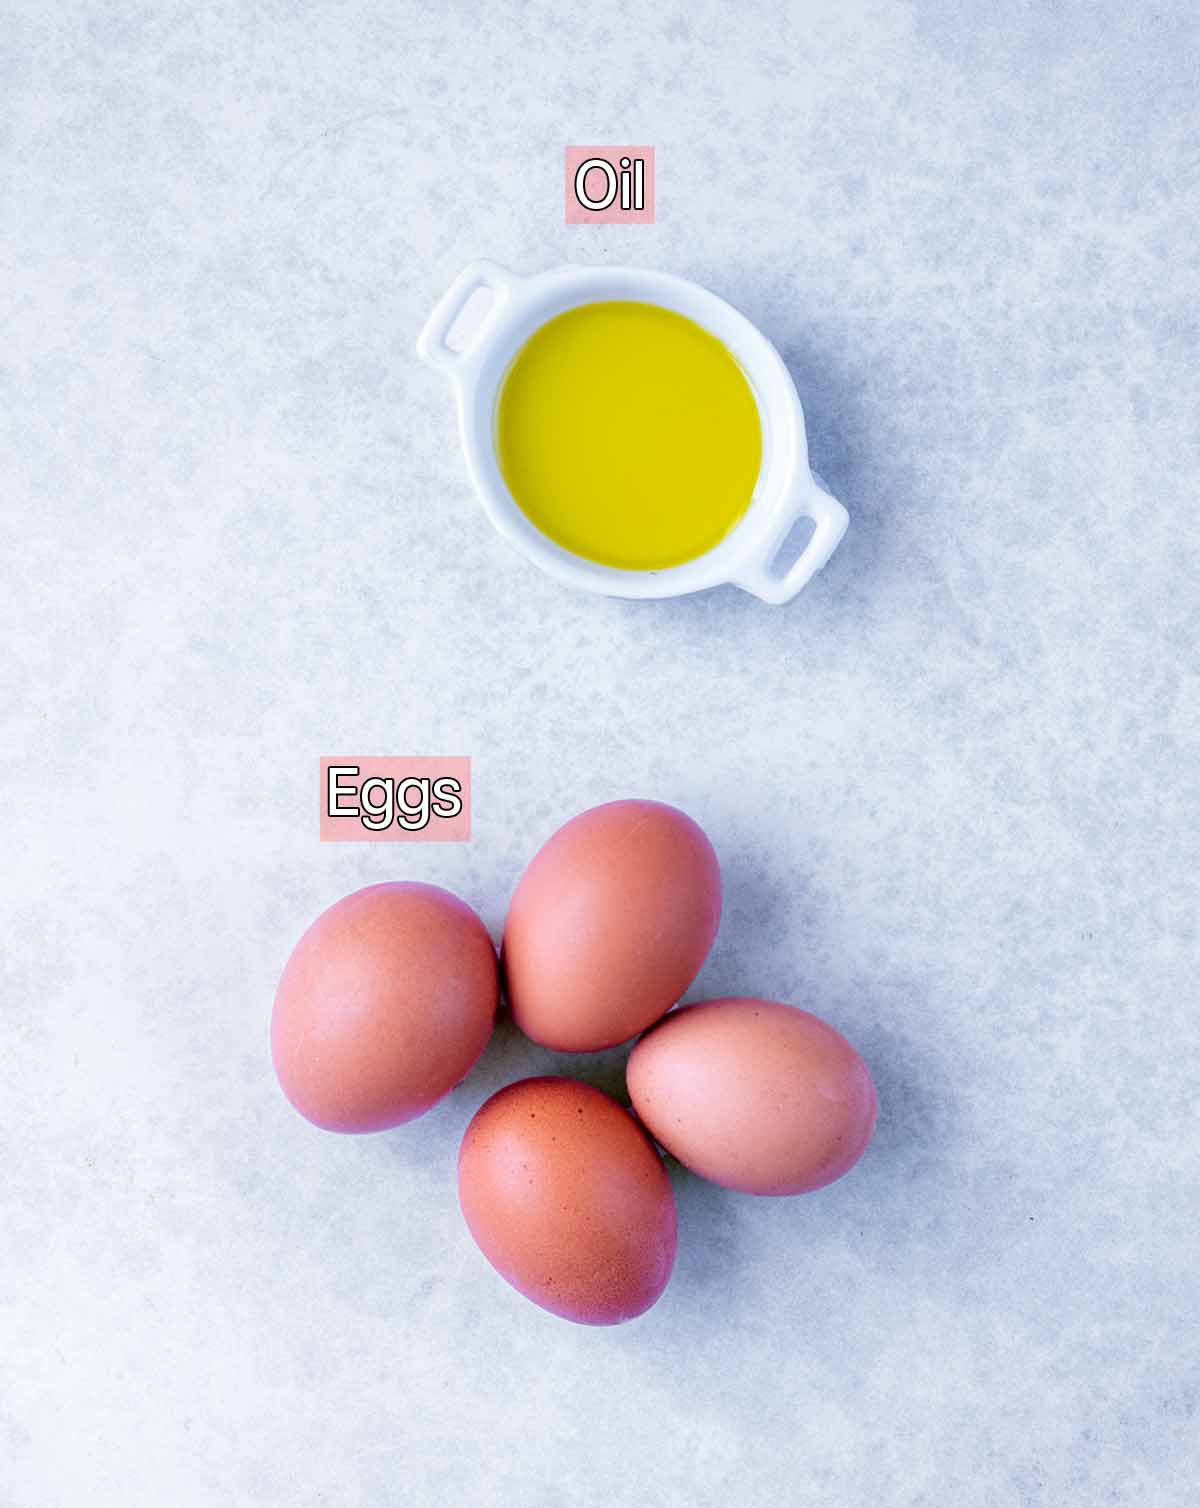 Four eggs and a small dish of oil, both with text labels.